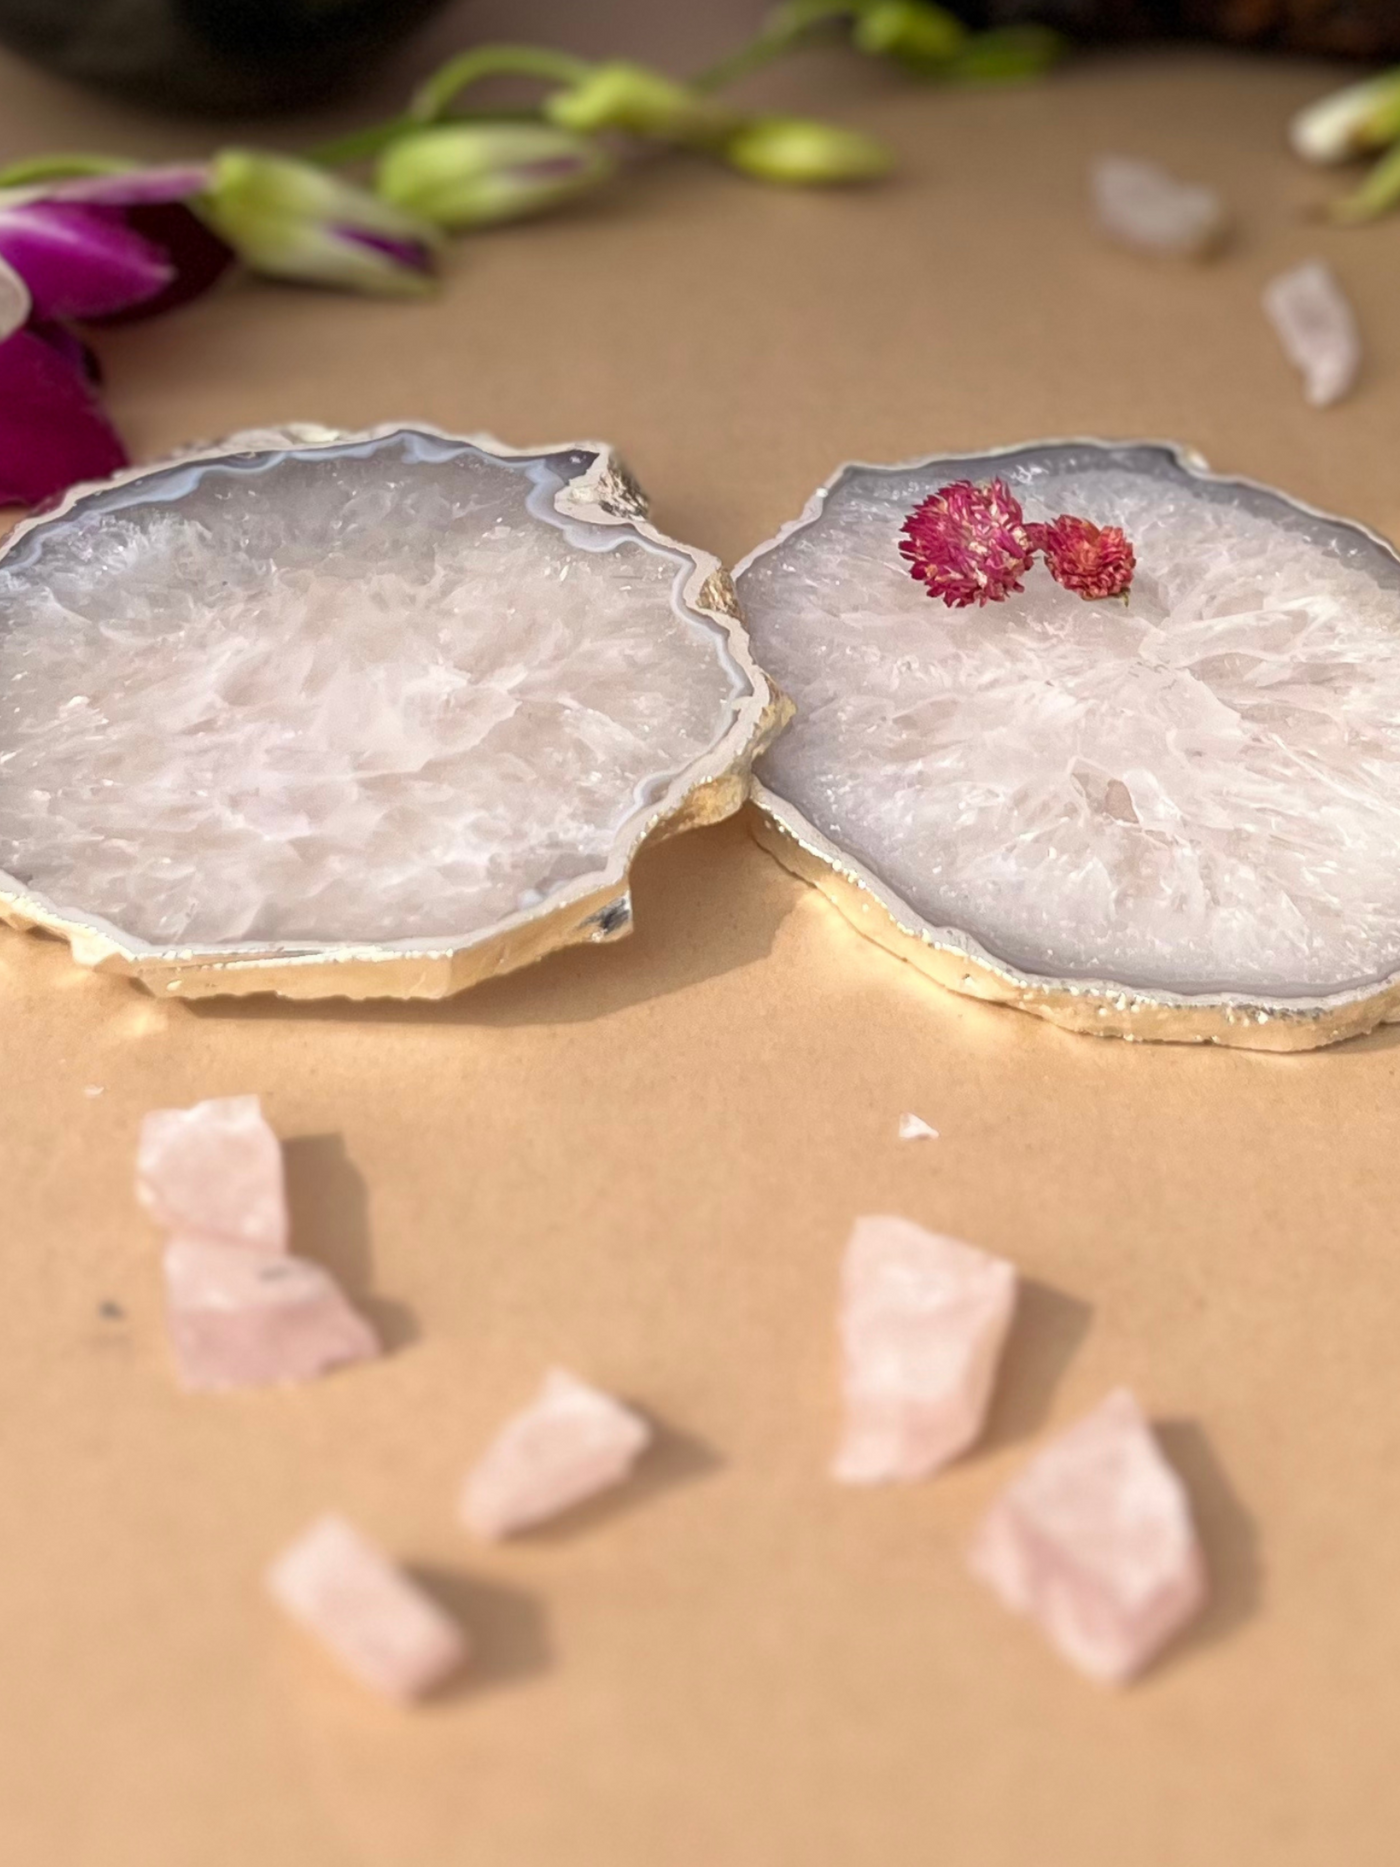 Silver Plated Coaster Set of 2 - Crystal Natural White Agate